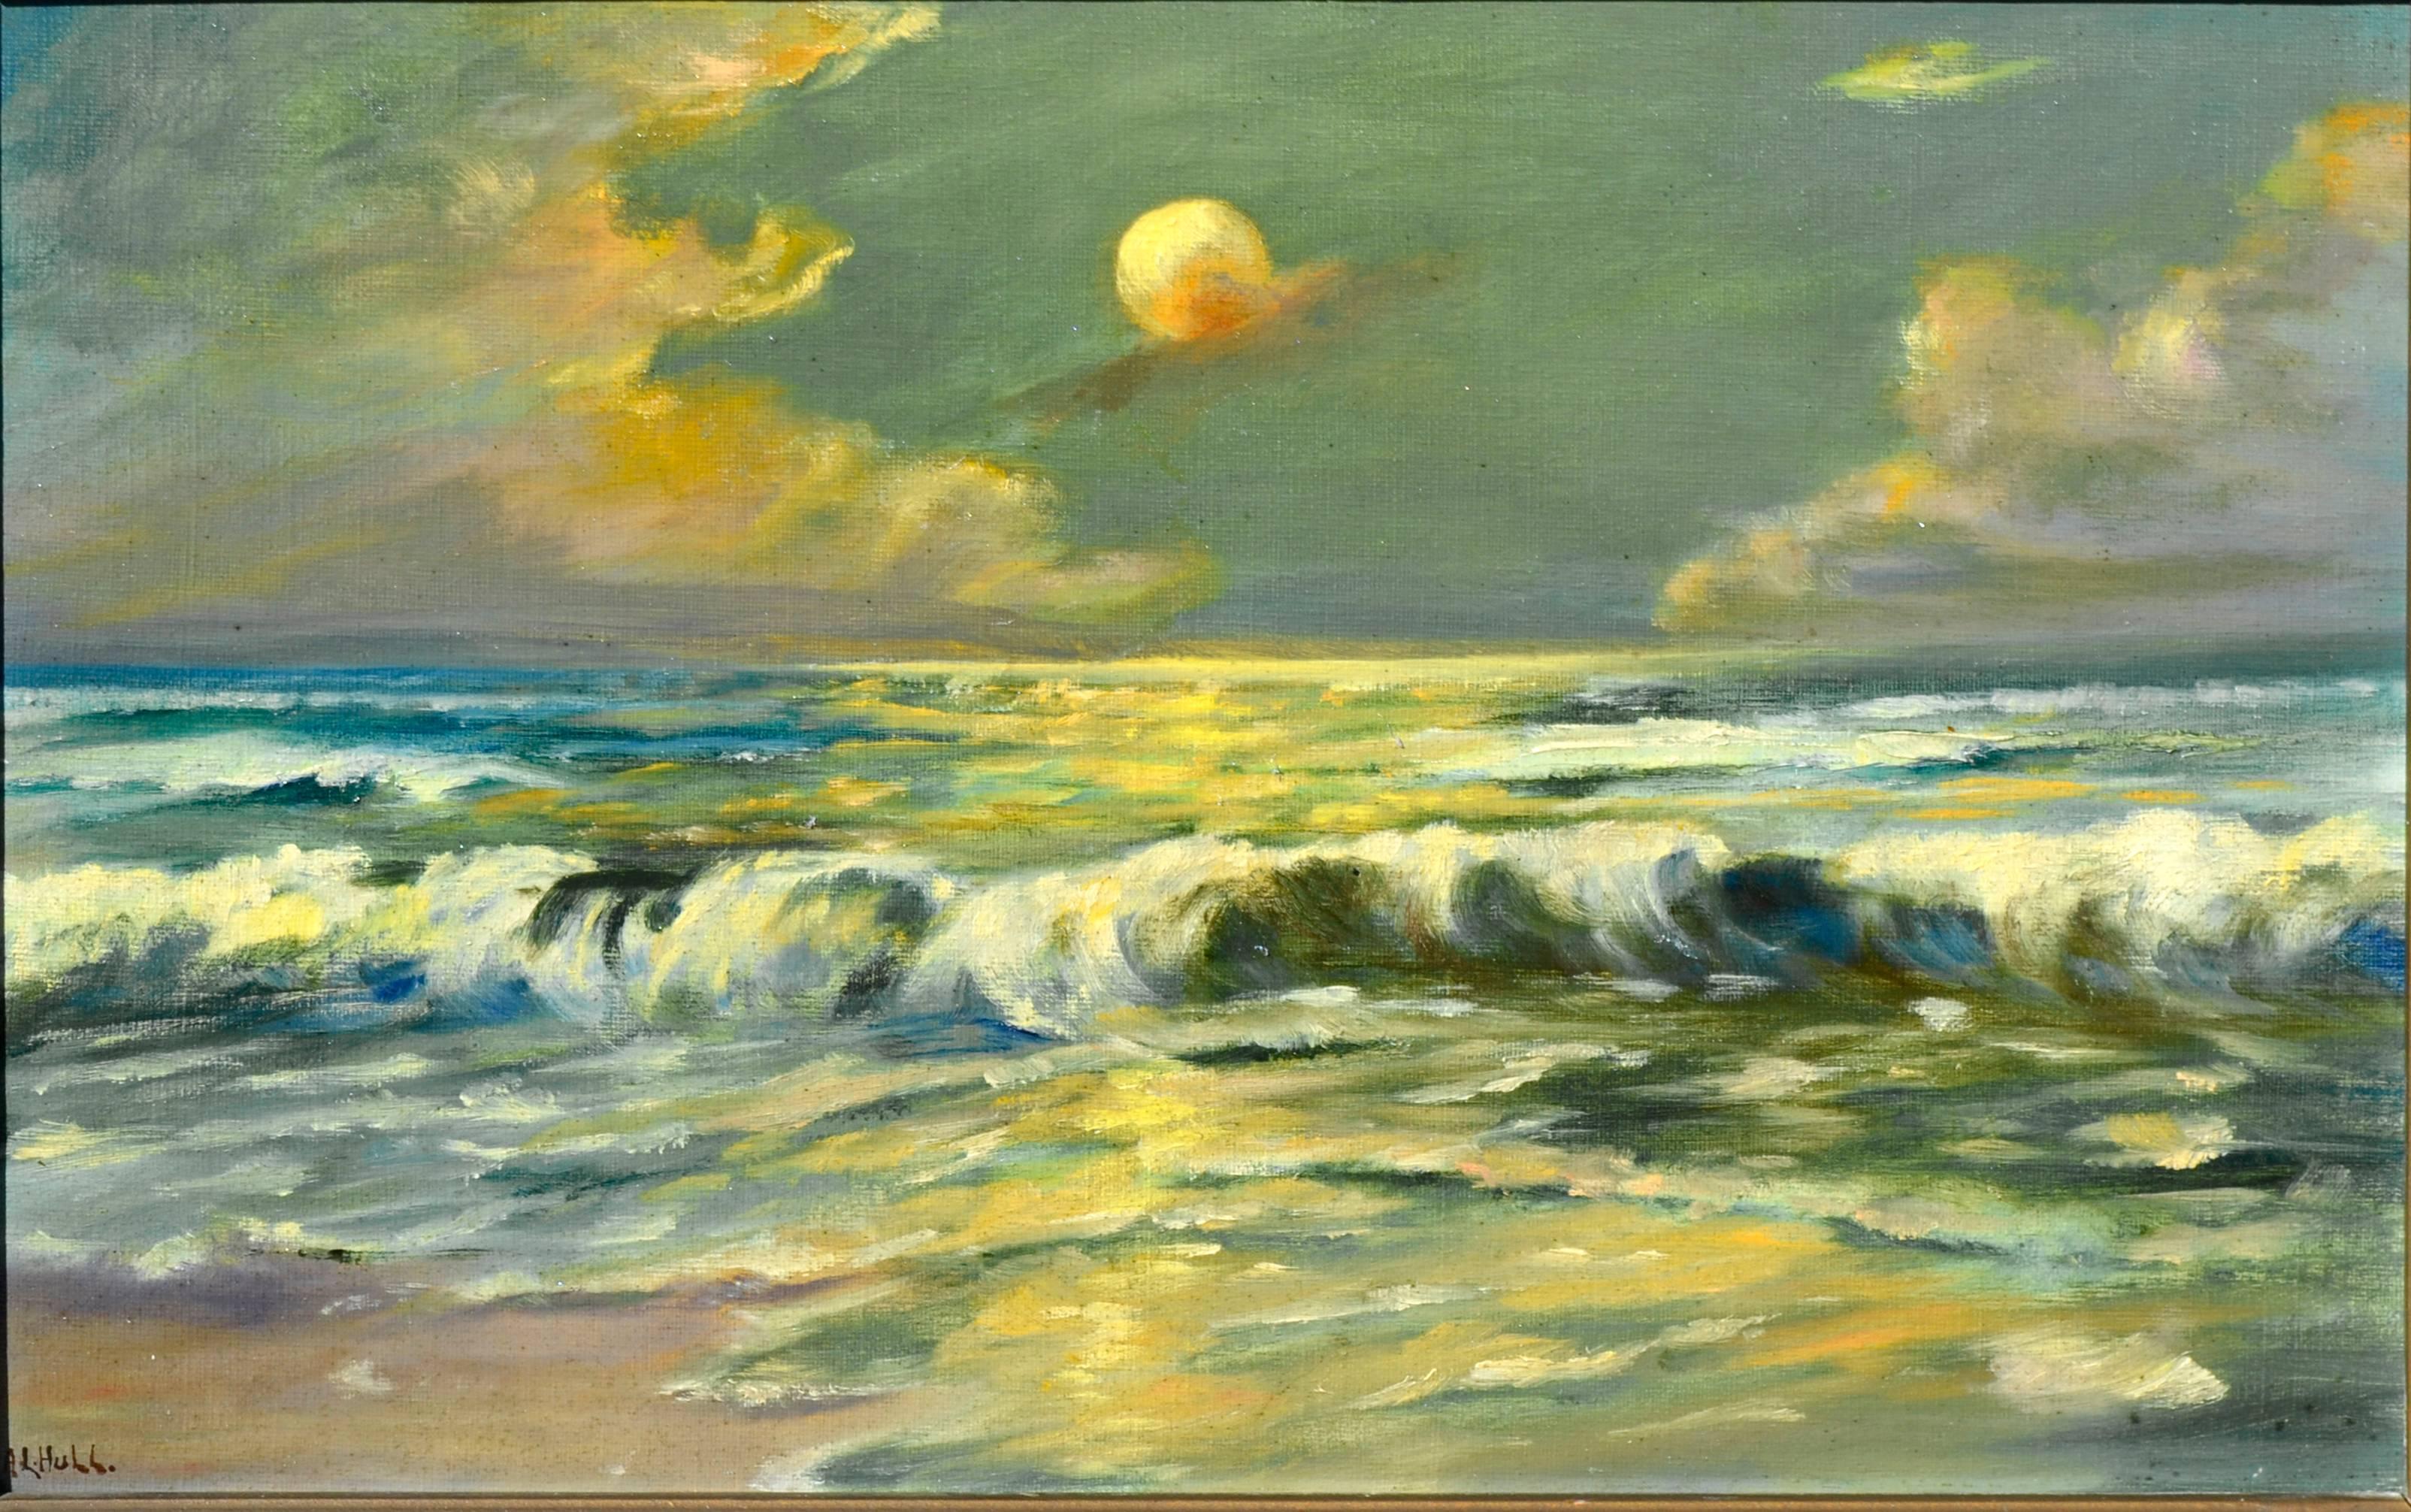 Moonlit Waves - Early 20th Century Nocturnal Seascape  - Painting by Anna Louise Hull